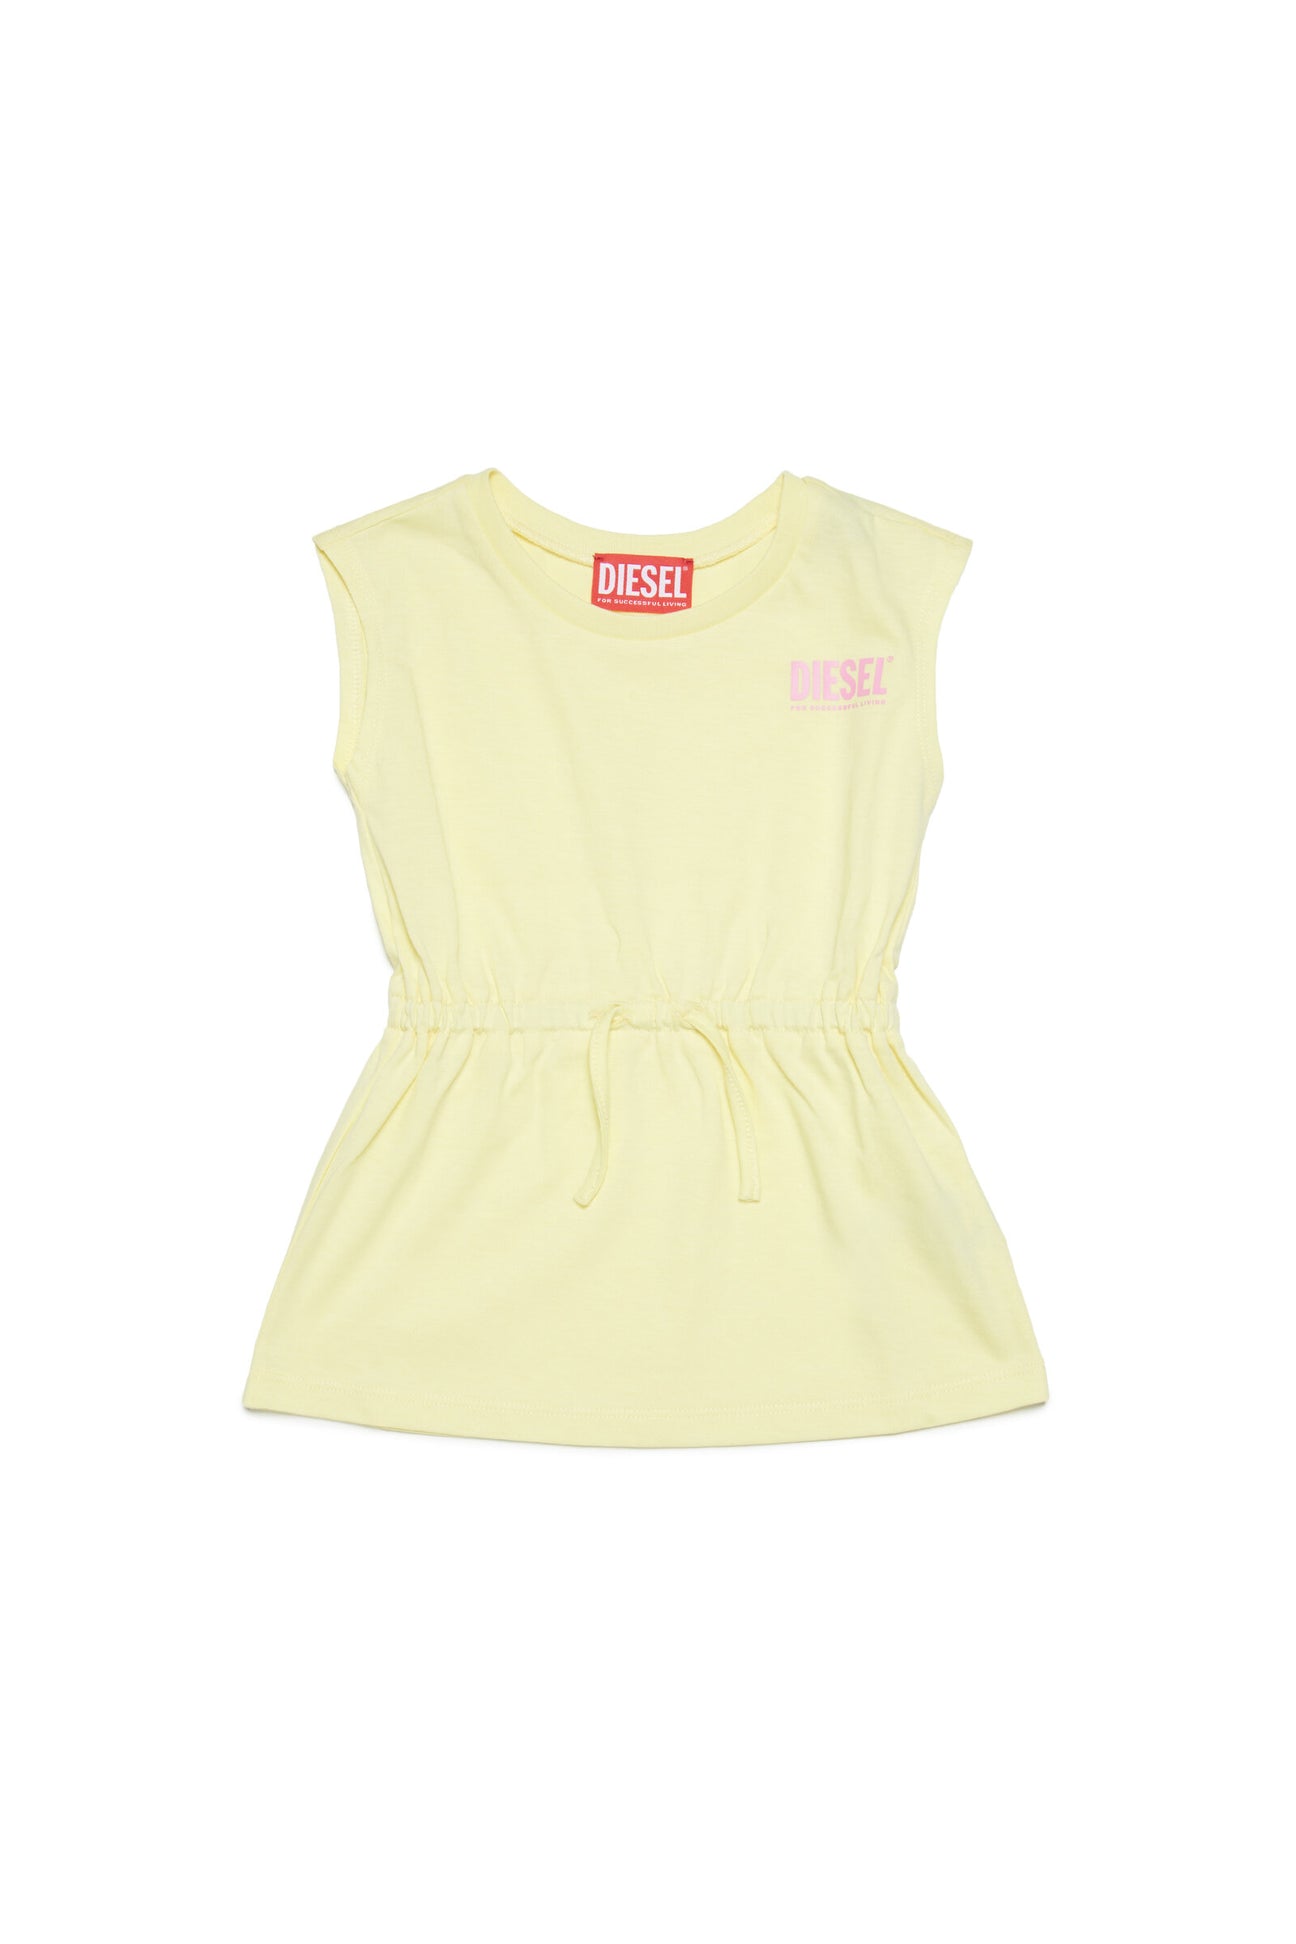 Yellow jersey sleeveless cover-up dress with logo Yellow jersey sleeveless cover-up dress with logo